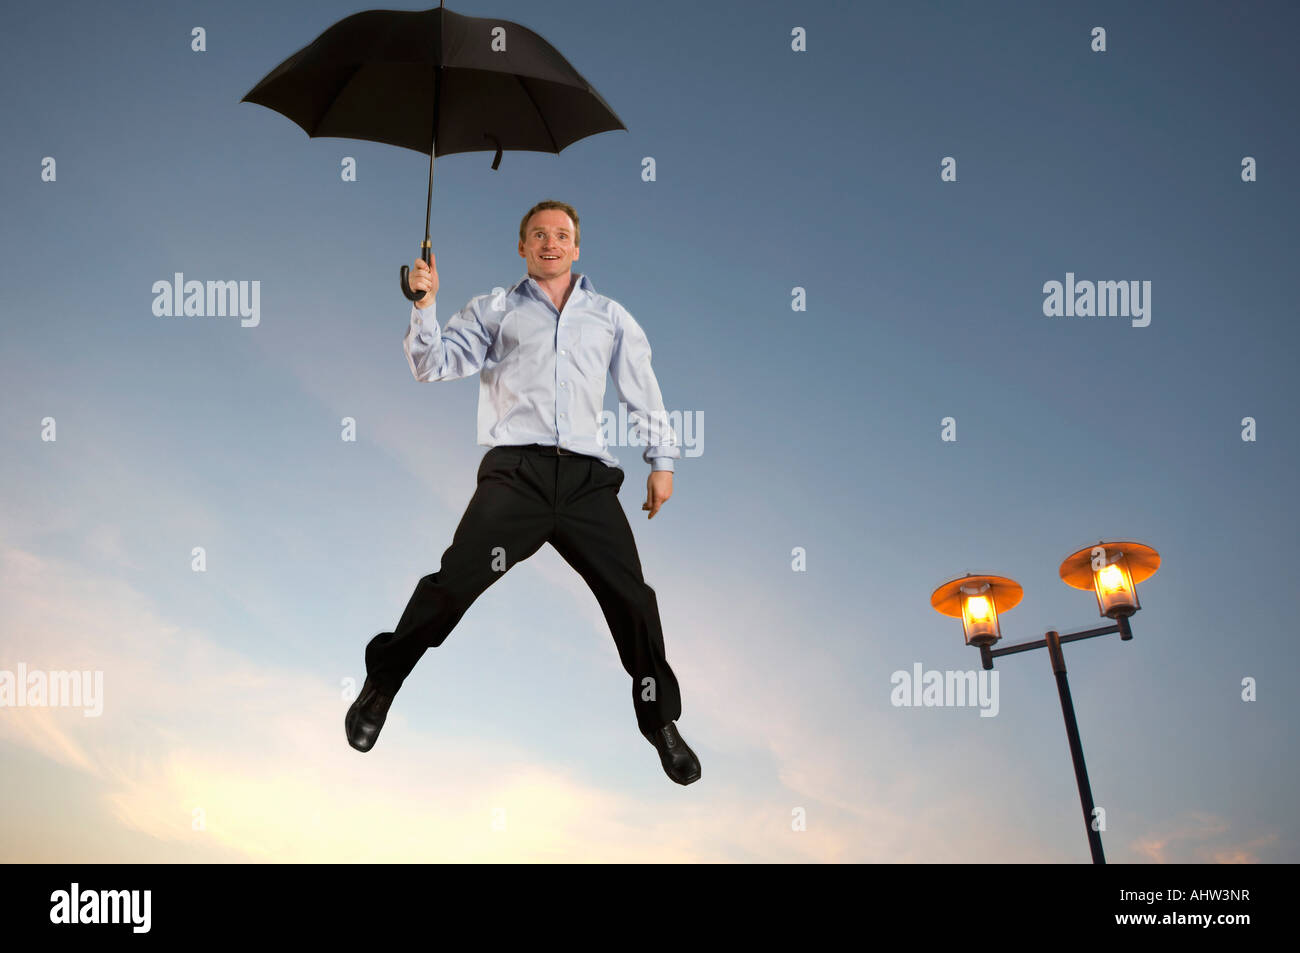 Businessman floating with an umbrella Stock Photo